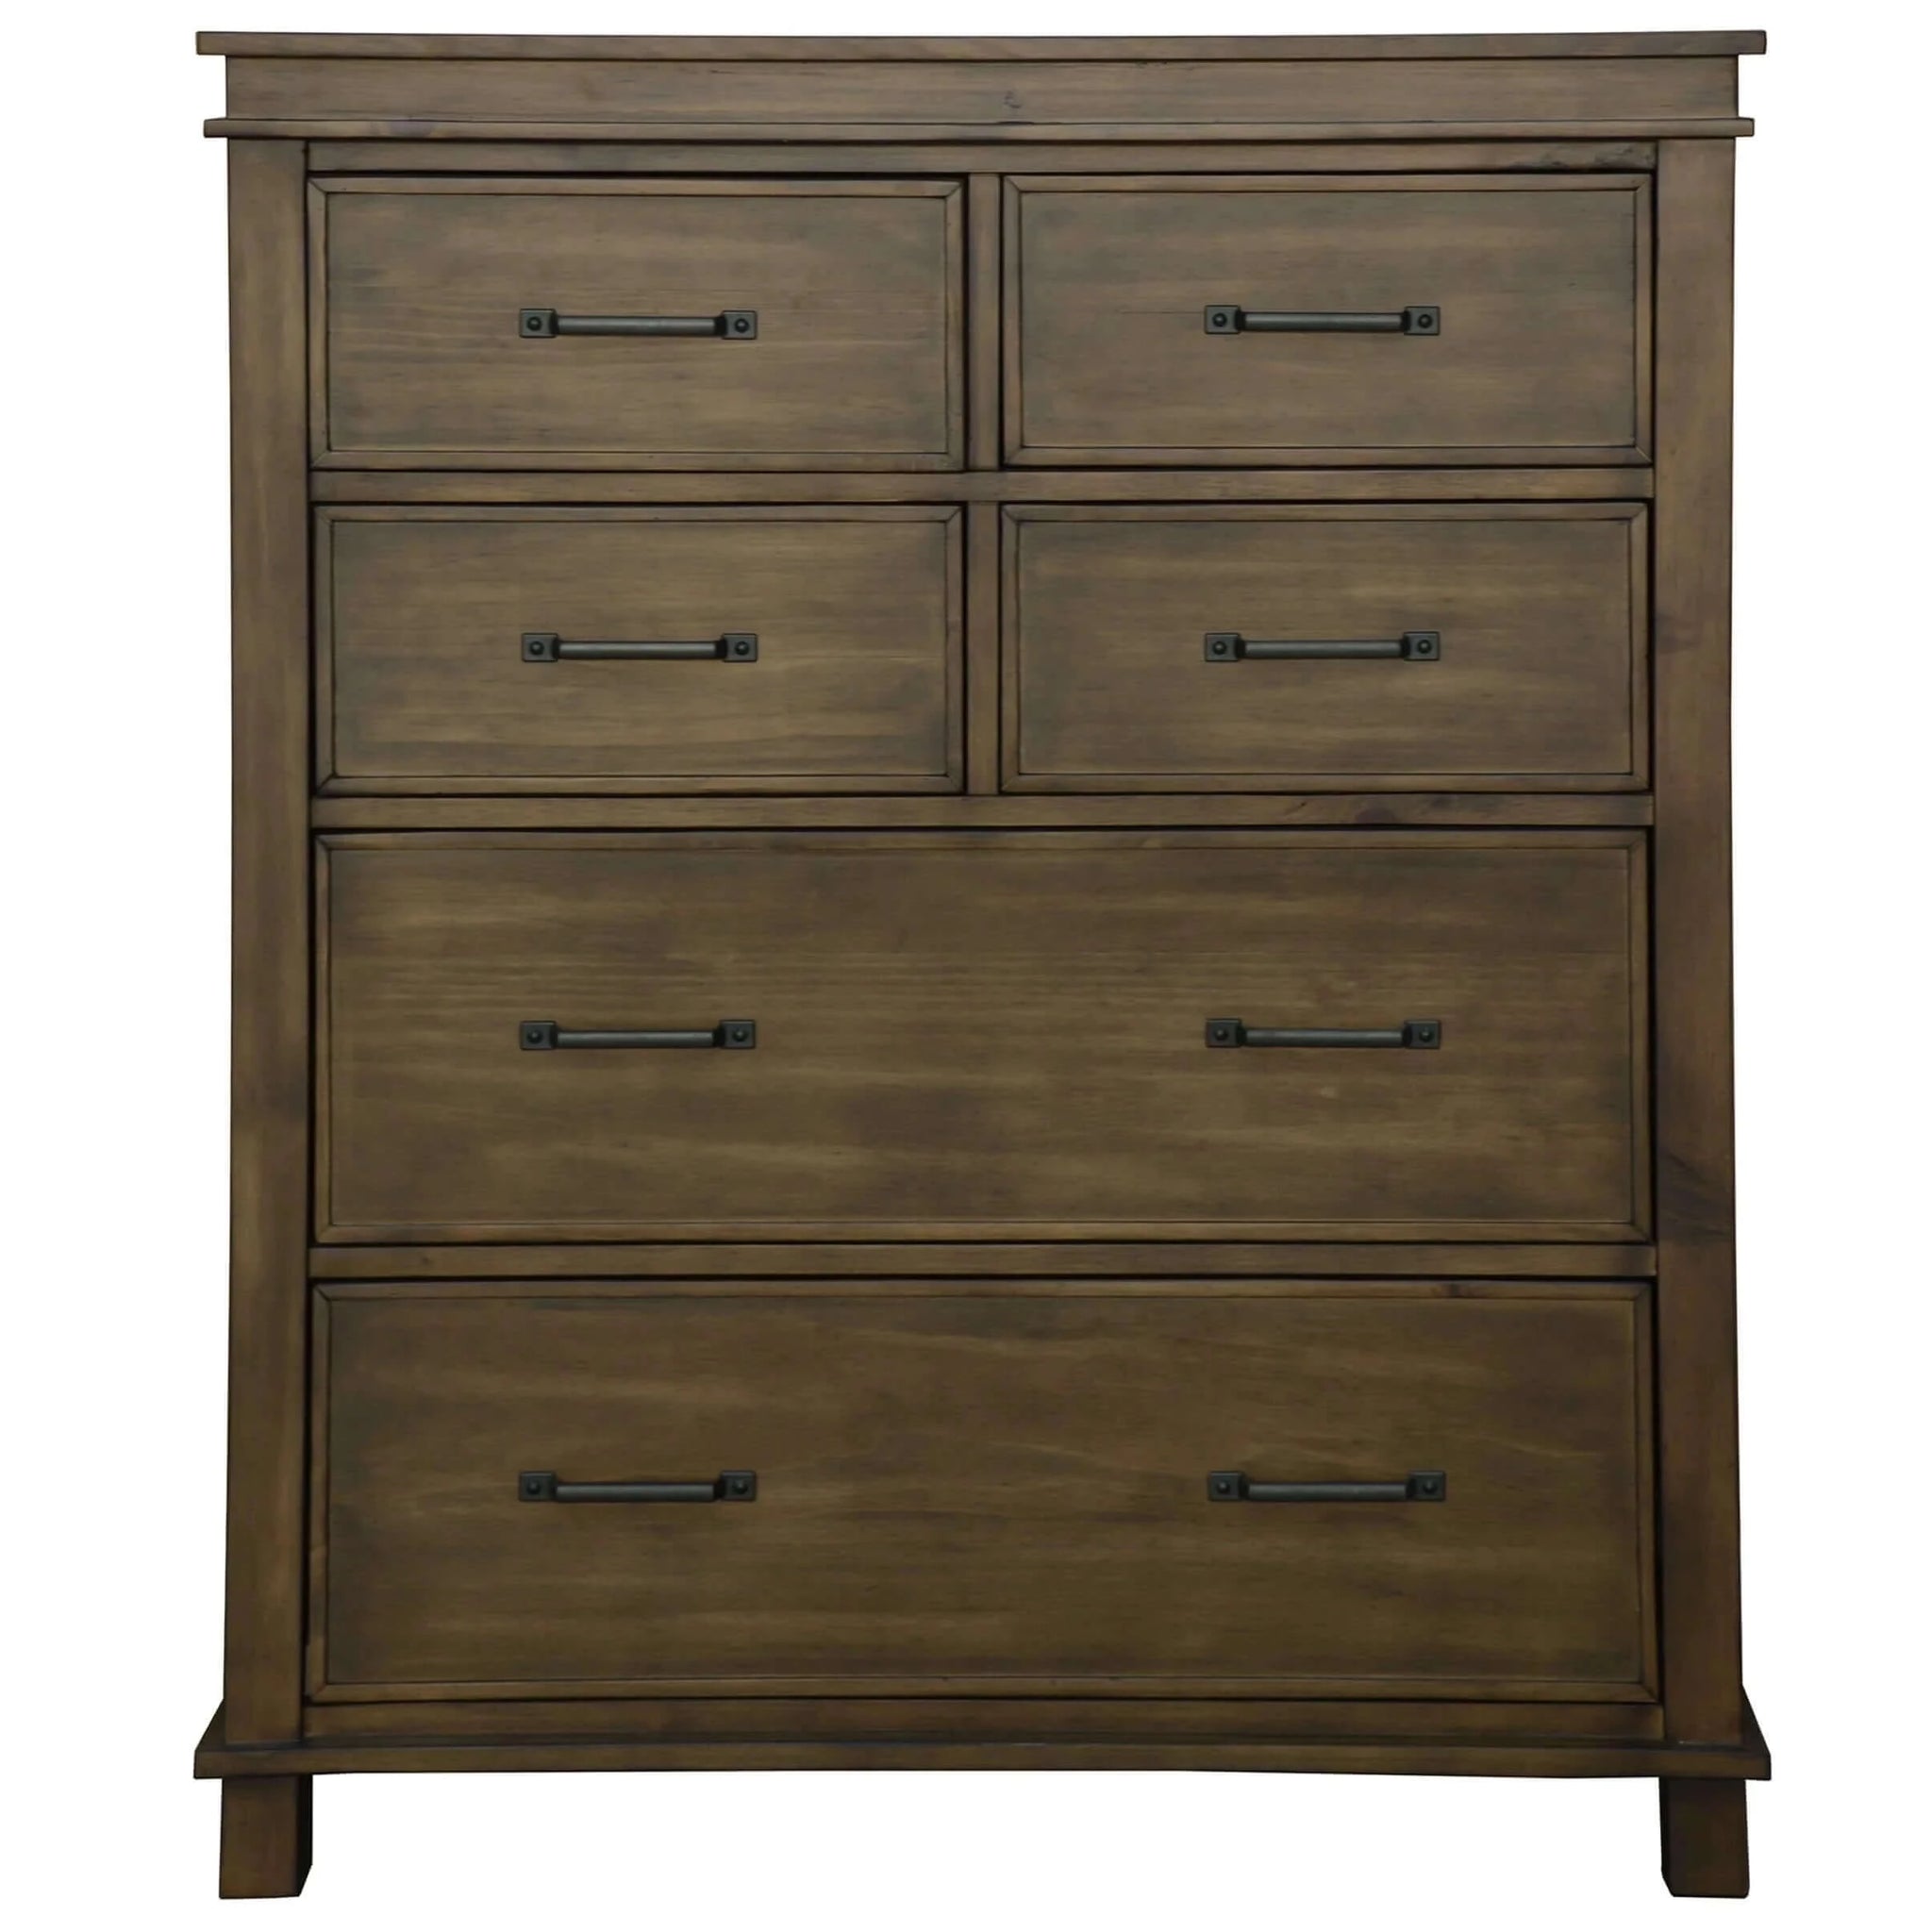 Lily Tallboy 6 Chest of Drawers Solid Pine Wood Bed Storage Cabinet -Rustic Grey-Upinteriors